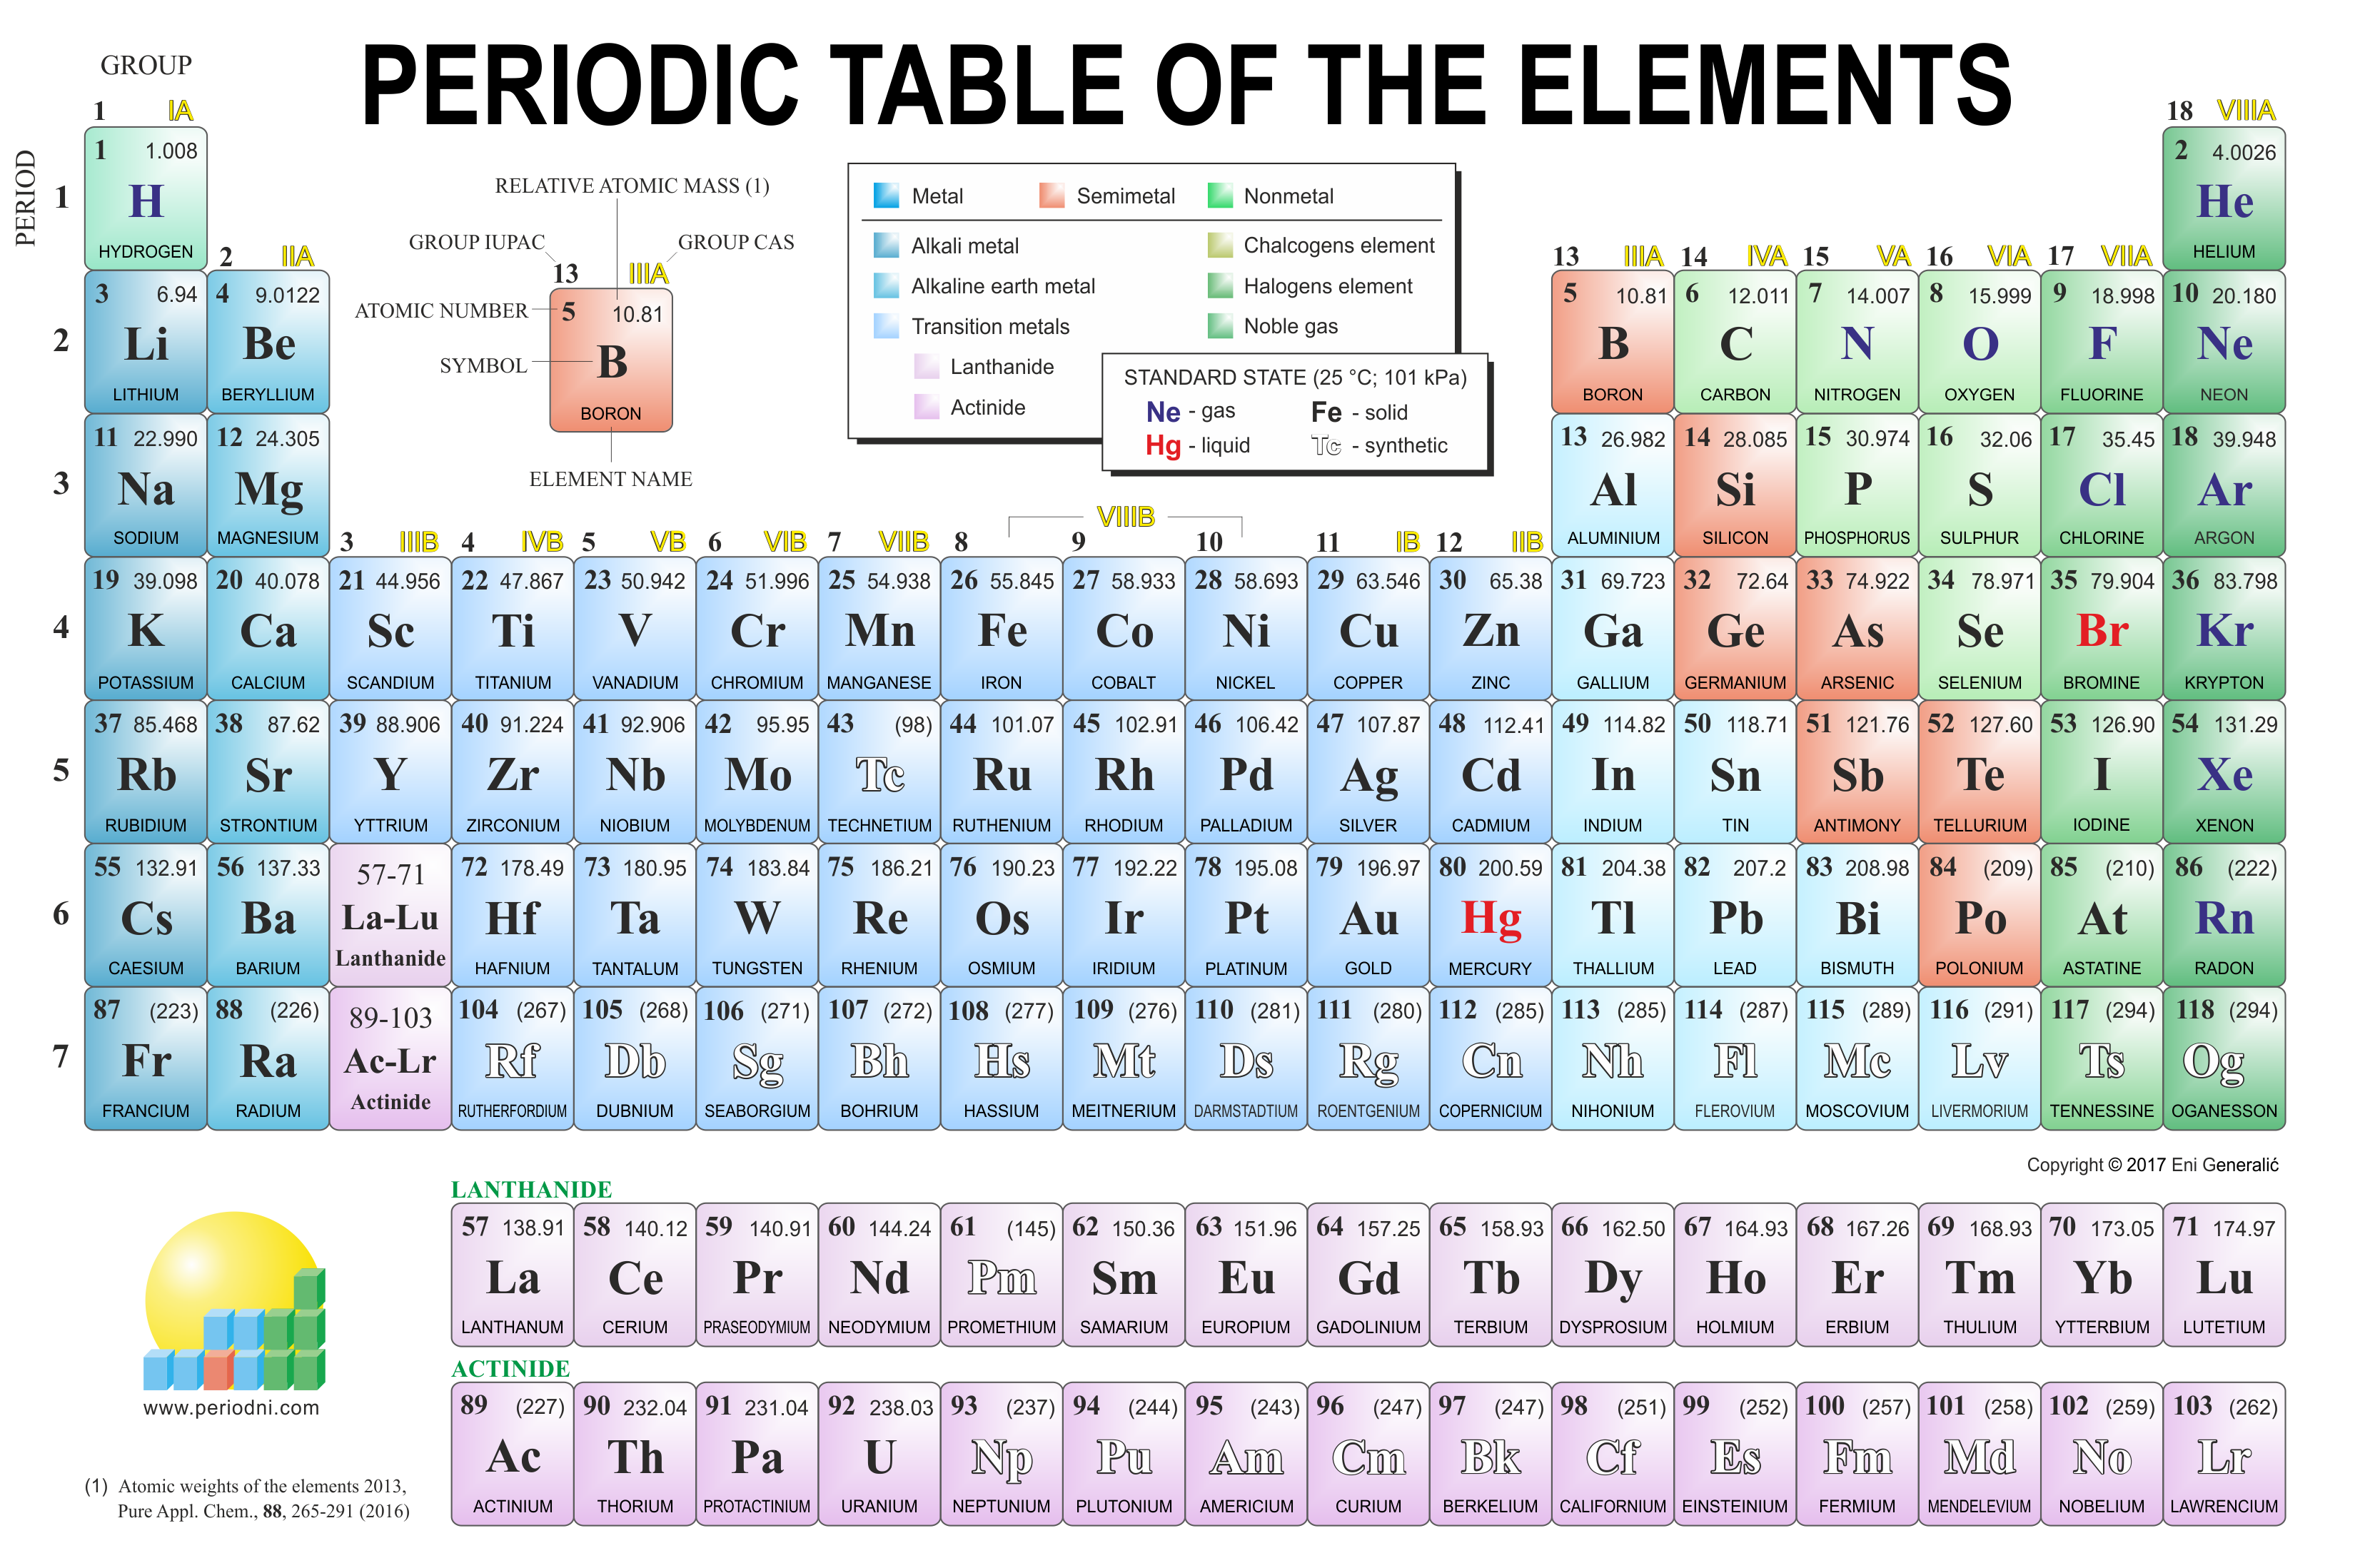 download modernperiodictablepng image from wwwperiodnicom